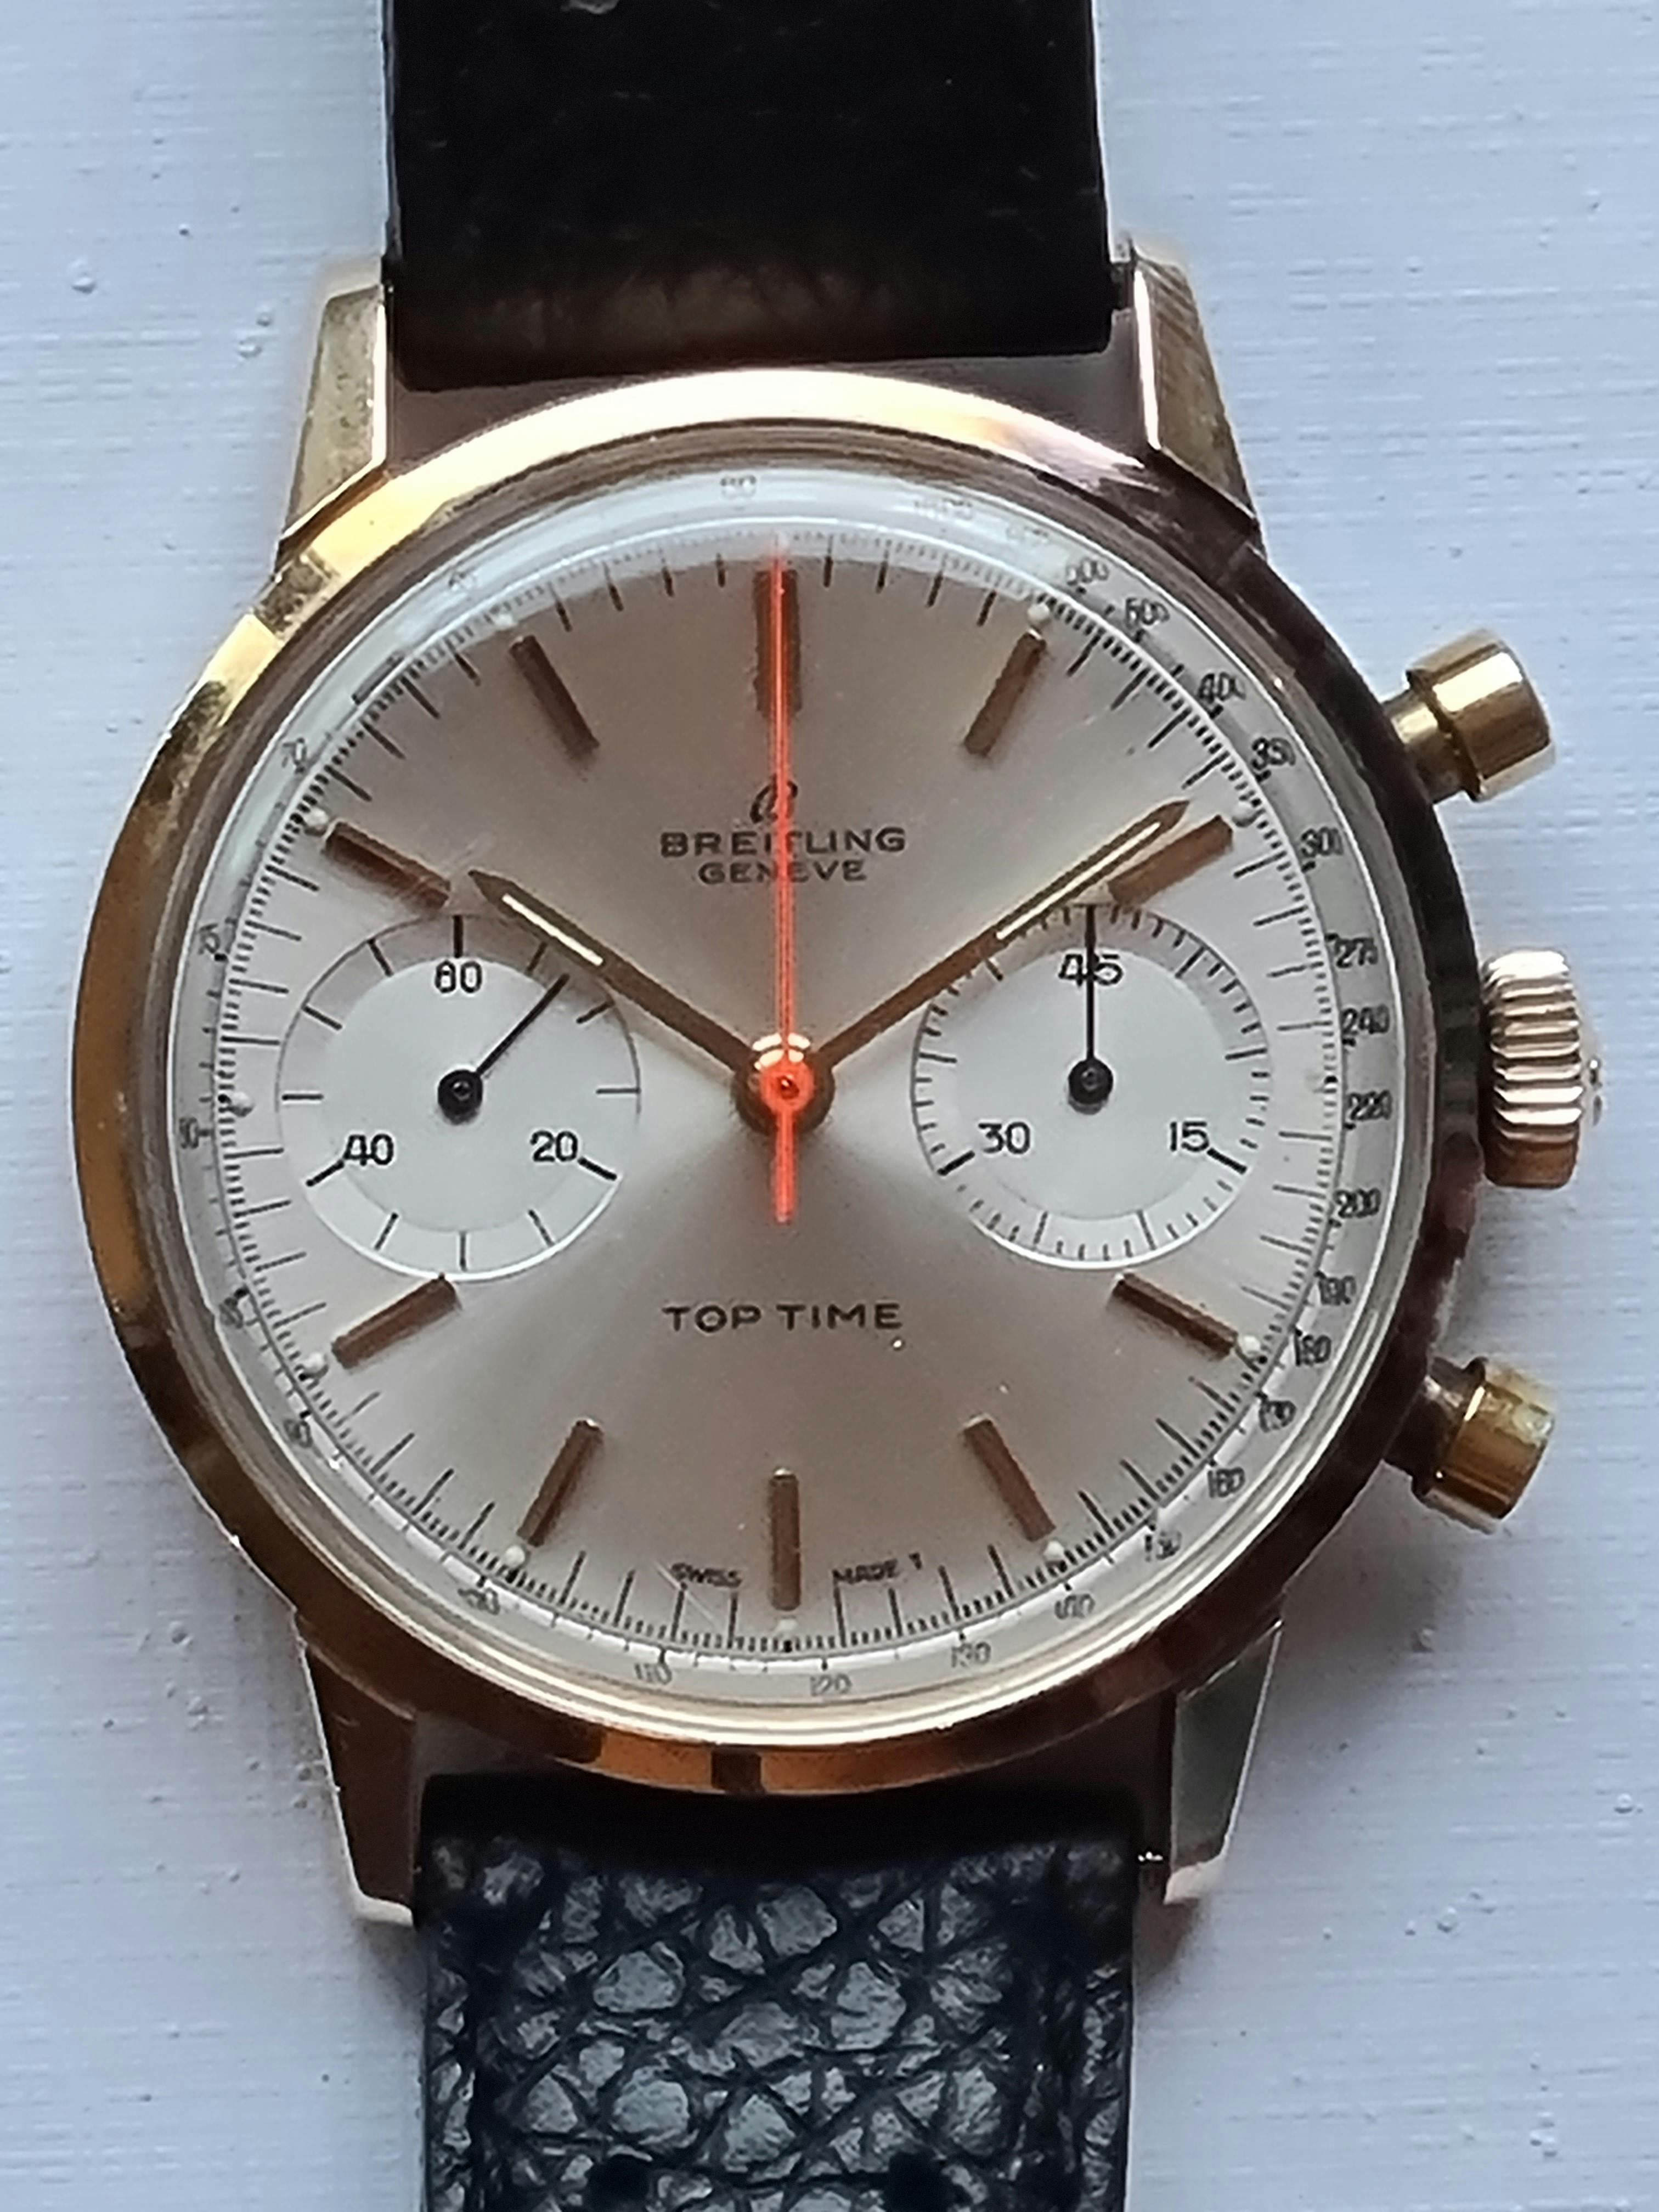 A vintage Breitling Top Time from the 1960s